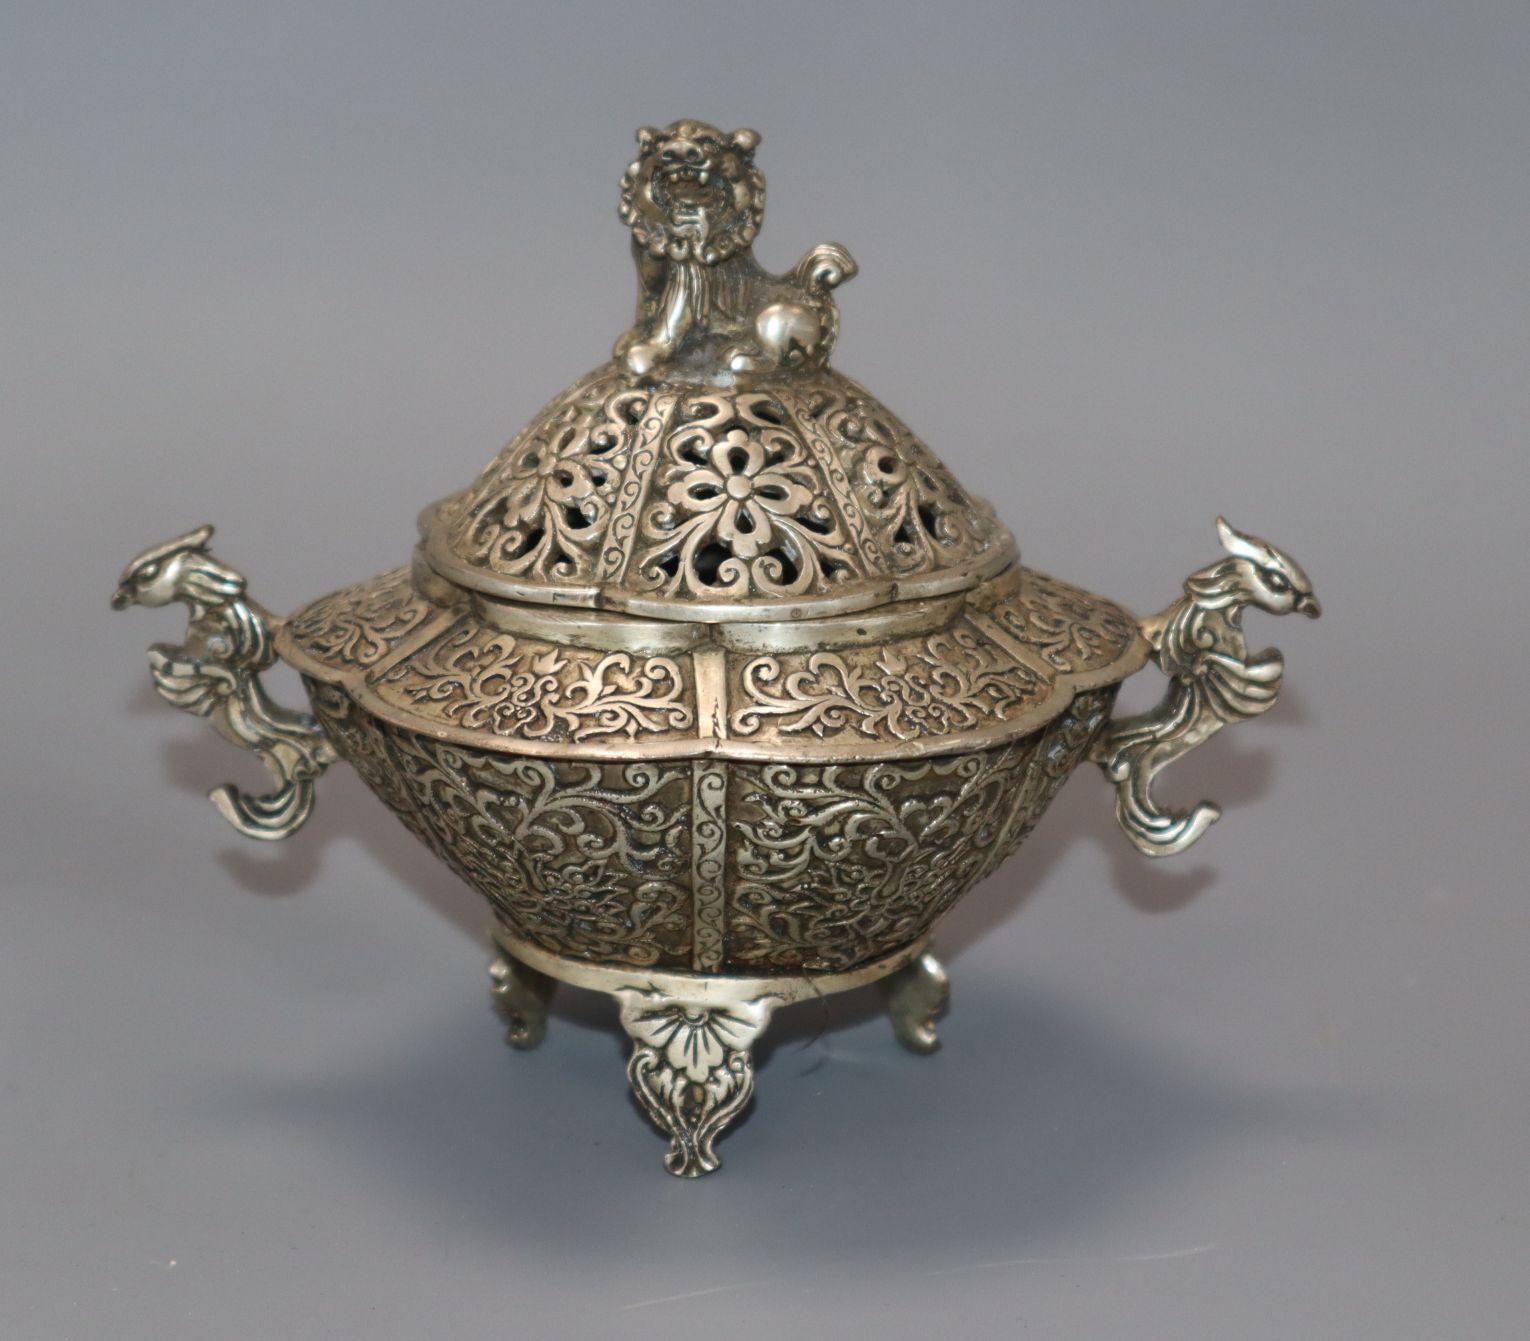 A Chinese plated censer height 13cm